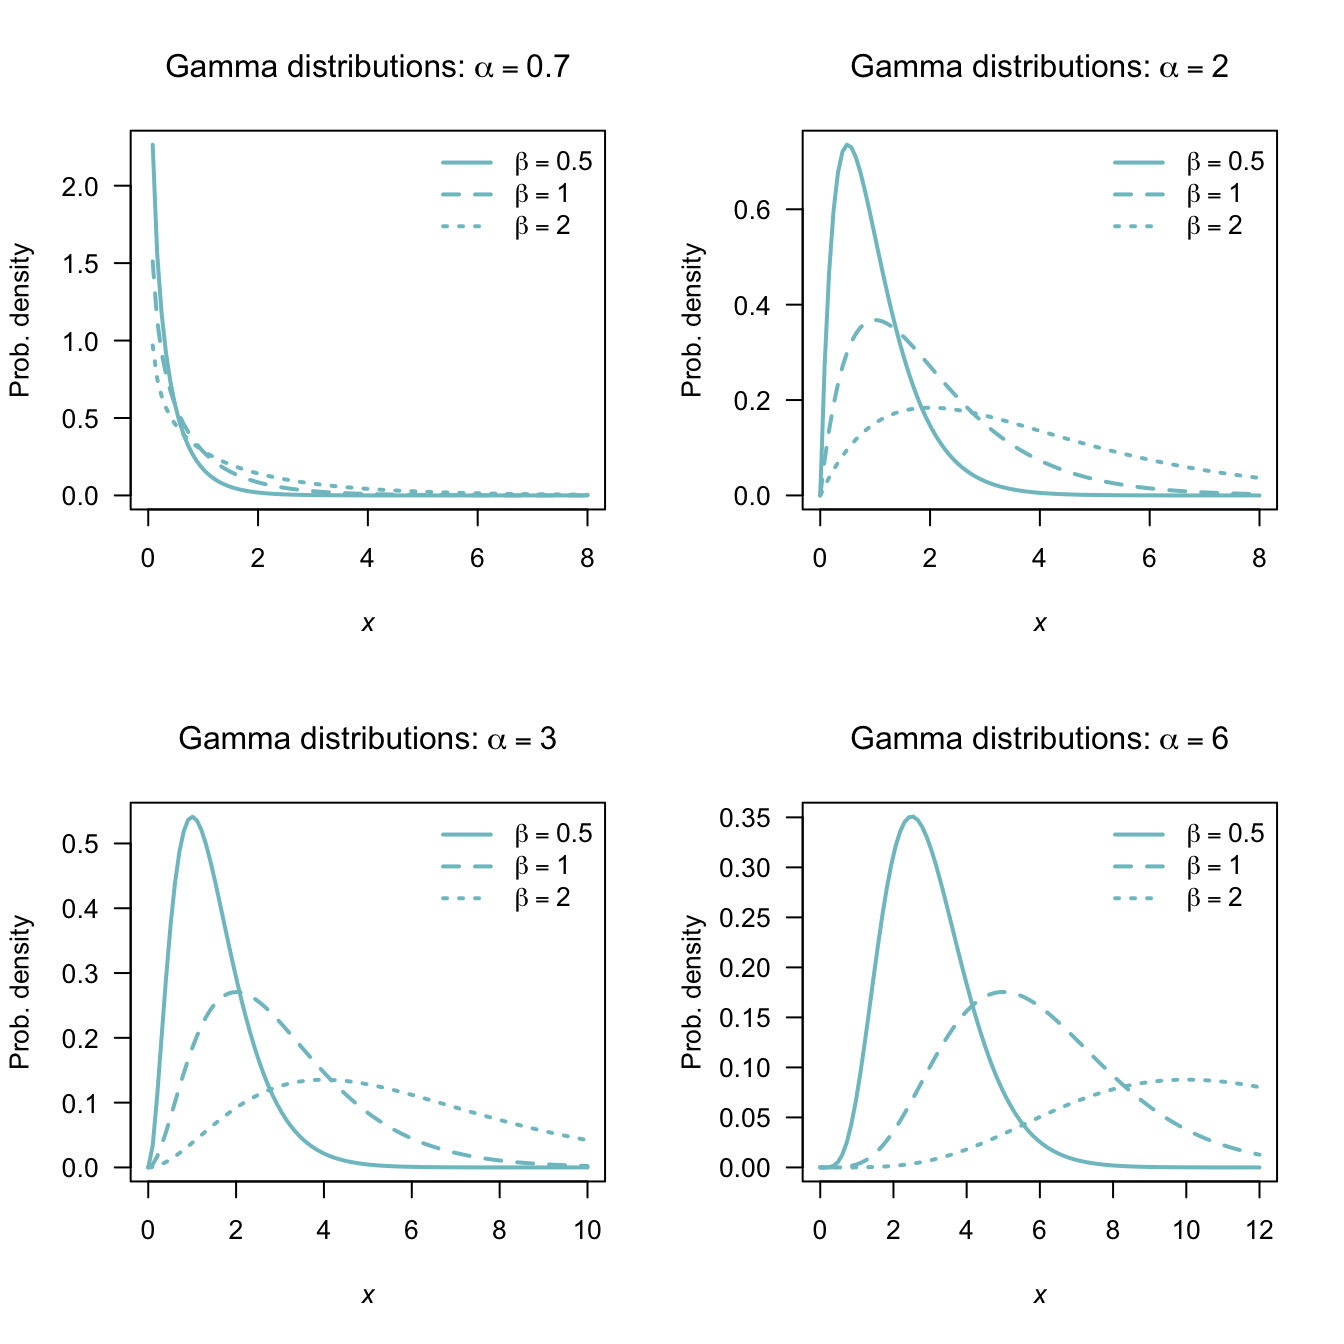 The pdf of a gamma distribution for various values of $\alpha$ and $\beta$